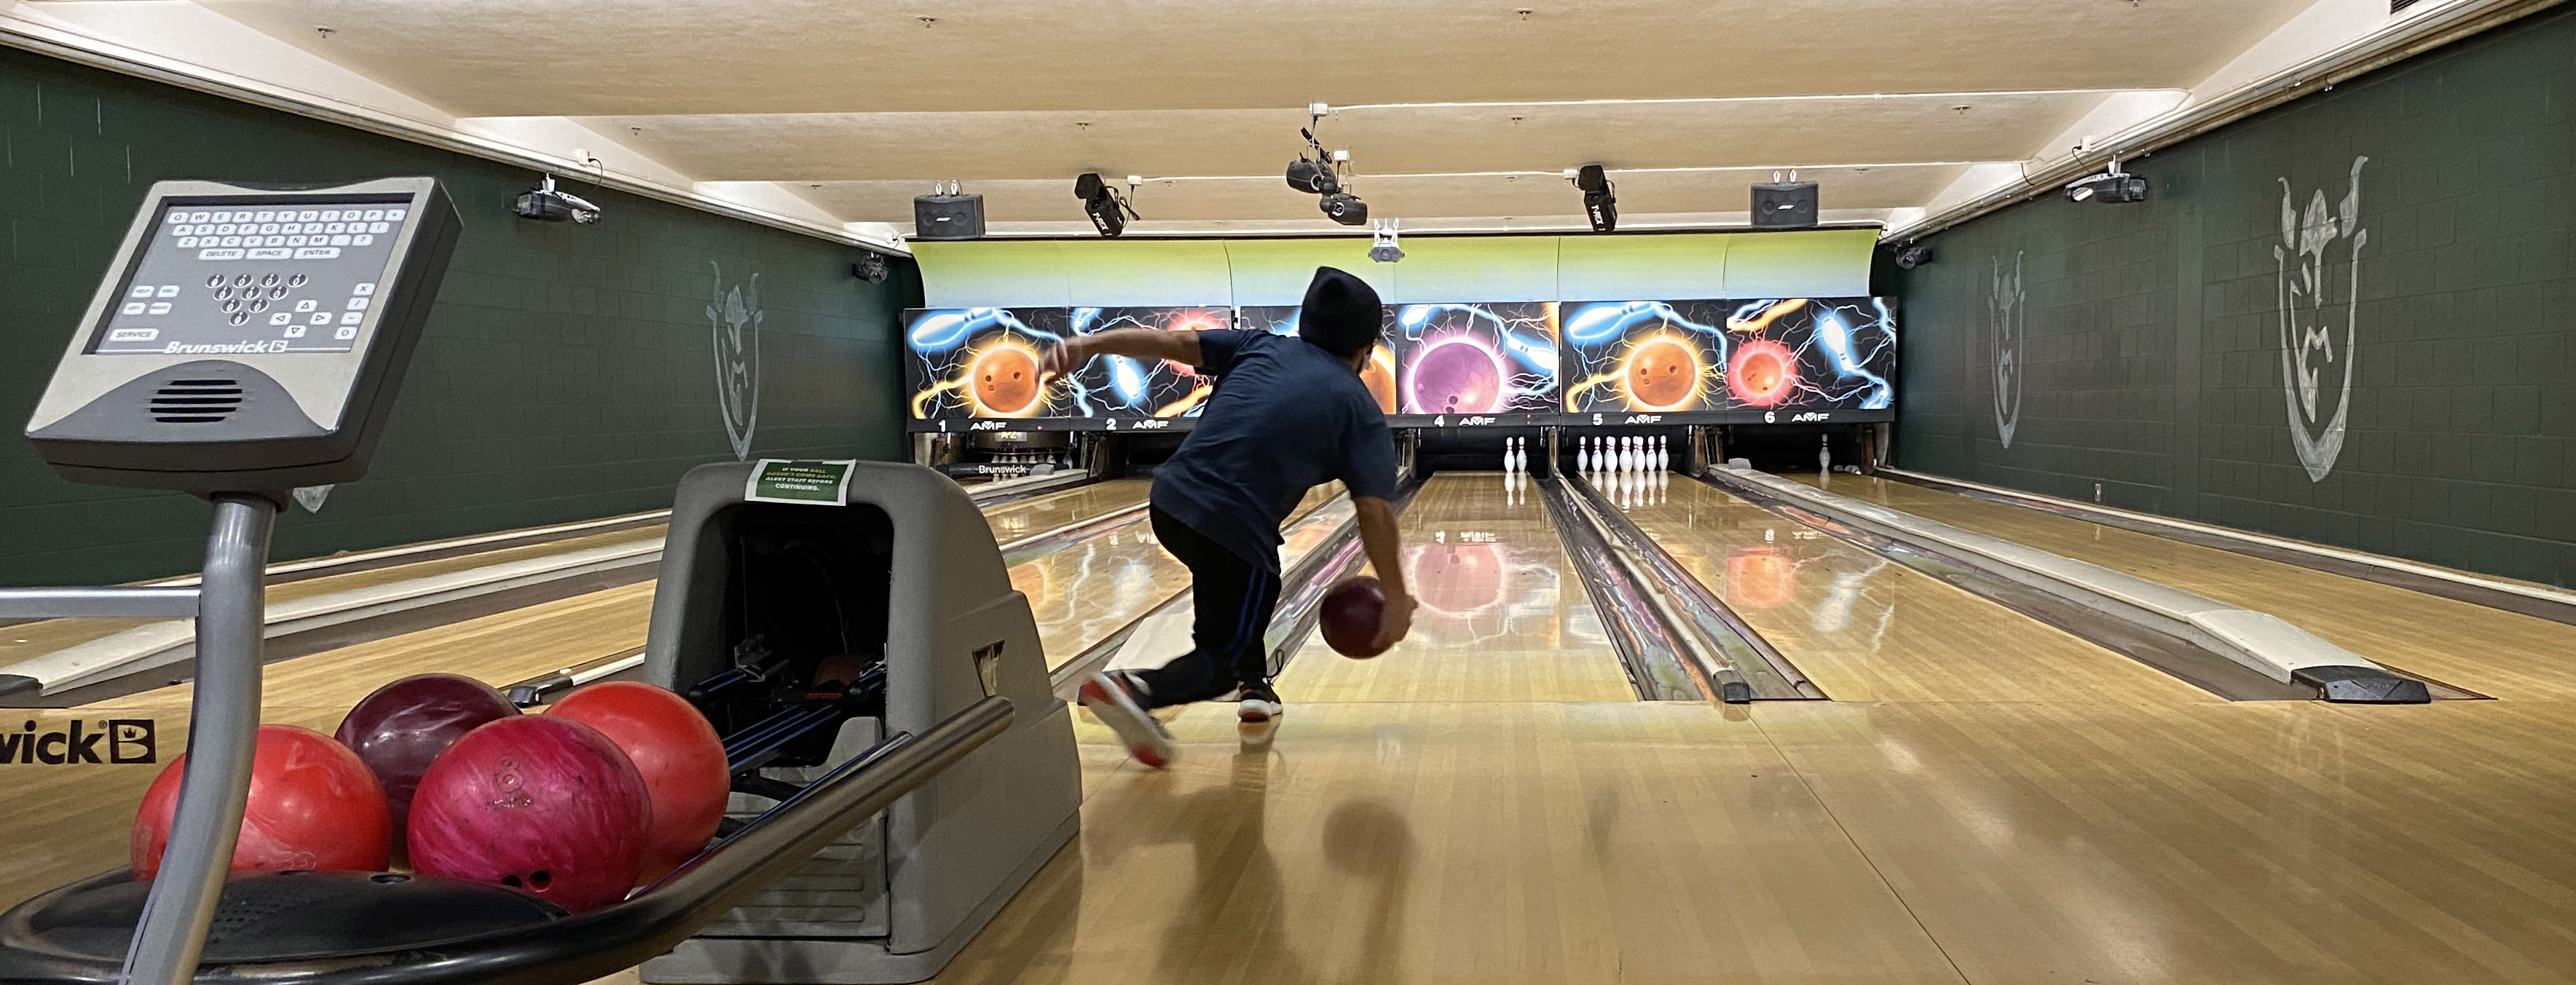 Student bowling in Viking Gameroom